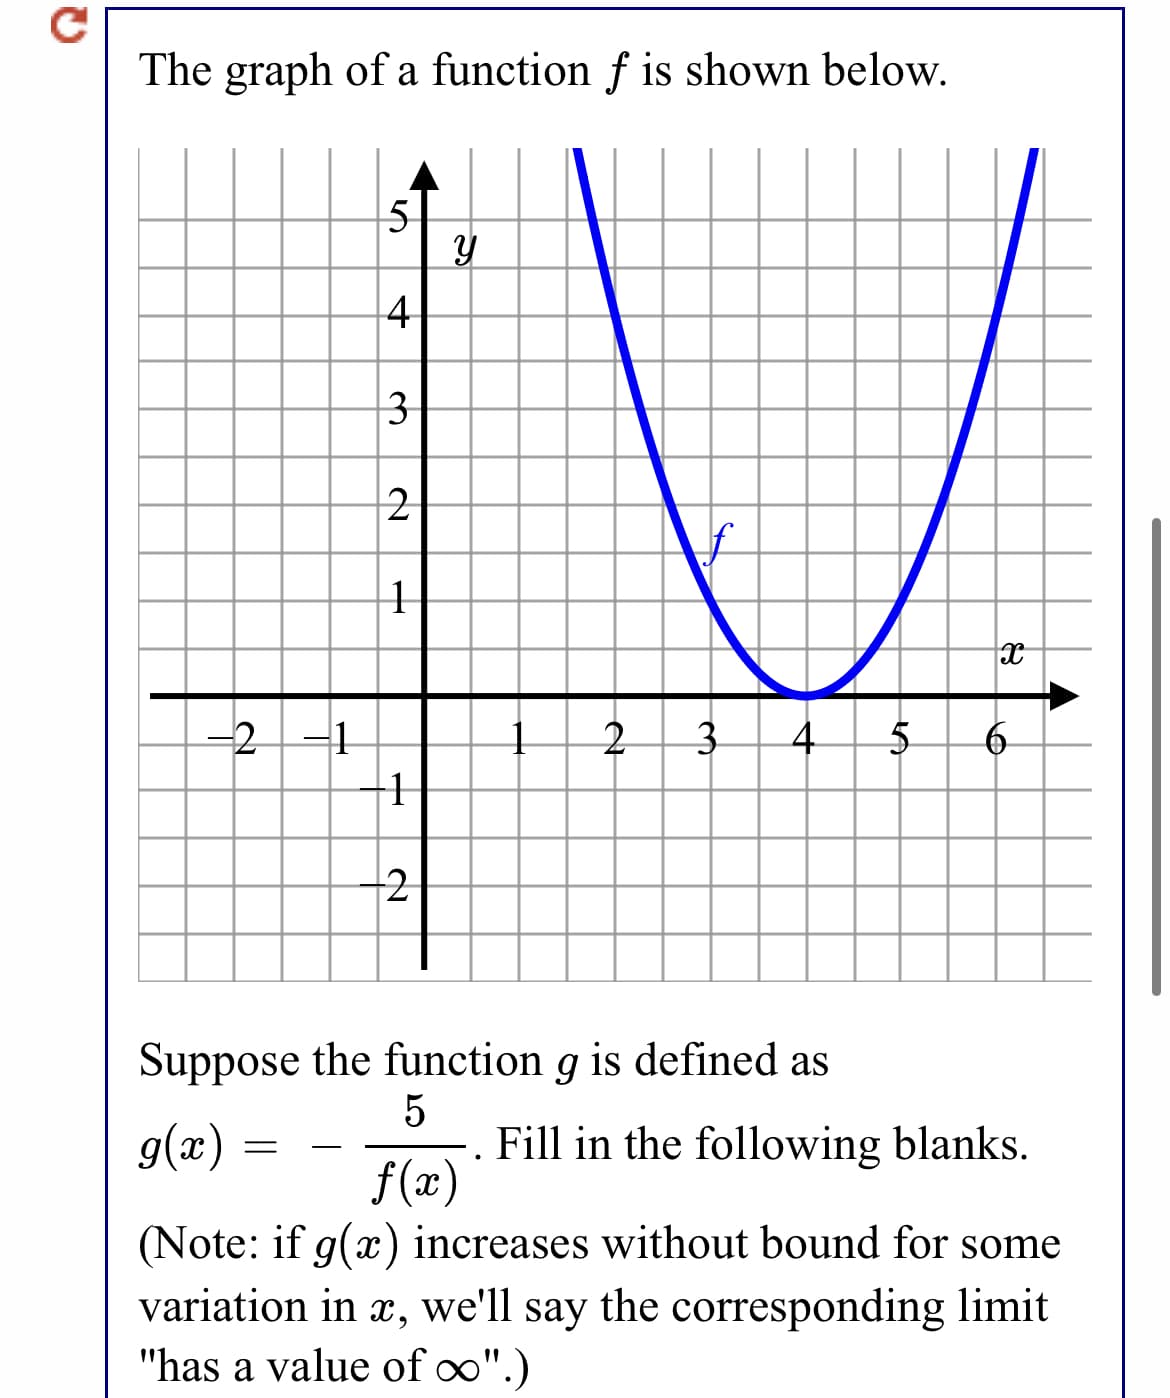 The graph of a function f is shown below.
5
4
3
2
-2
-1
4
Suppose the function g is defined as
5
Fill in the following blanks.
f(x)
g(x) :
-
(Note: if g(x) increases without bound for some
variation in x, we'll say the corresponding limit
"has a value of o".)
